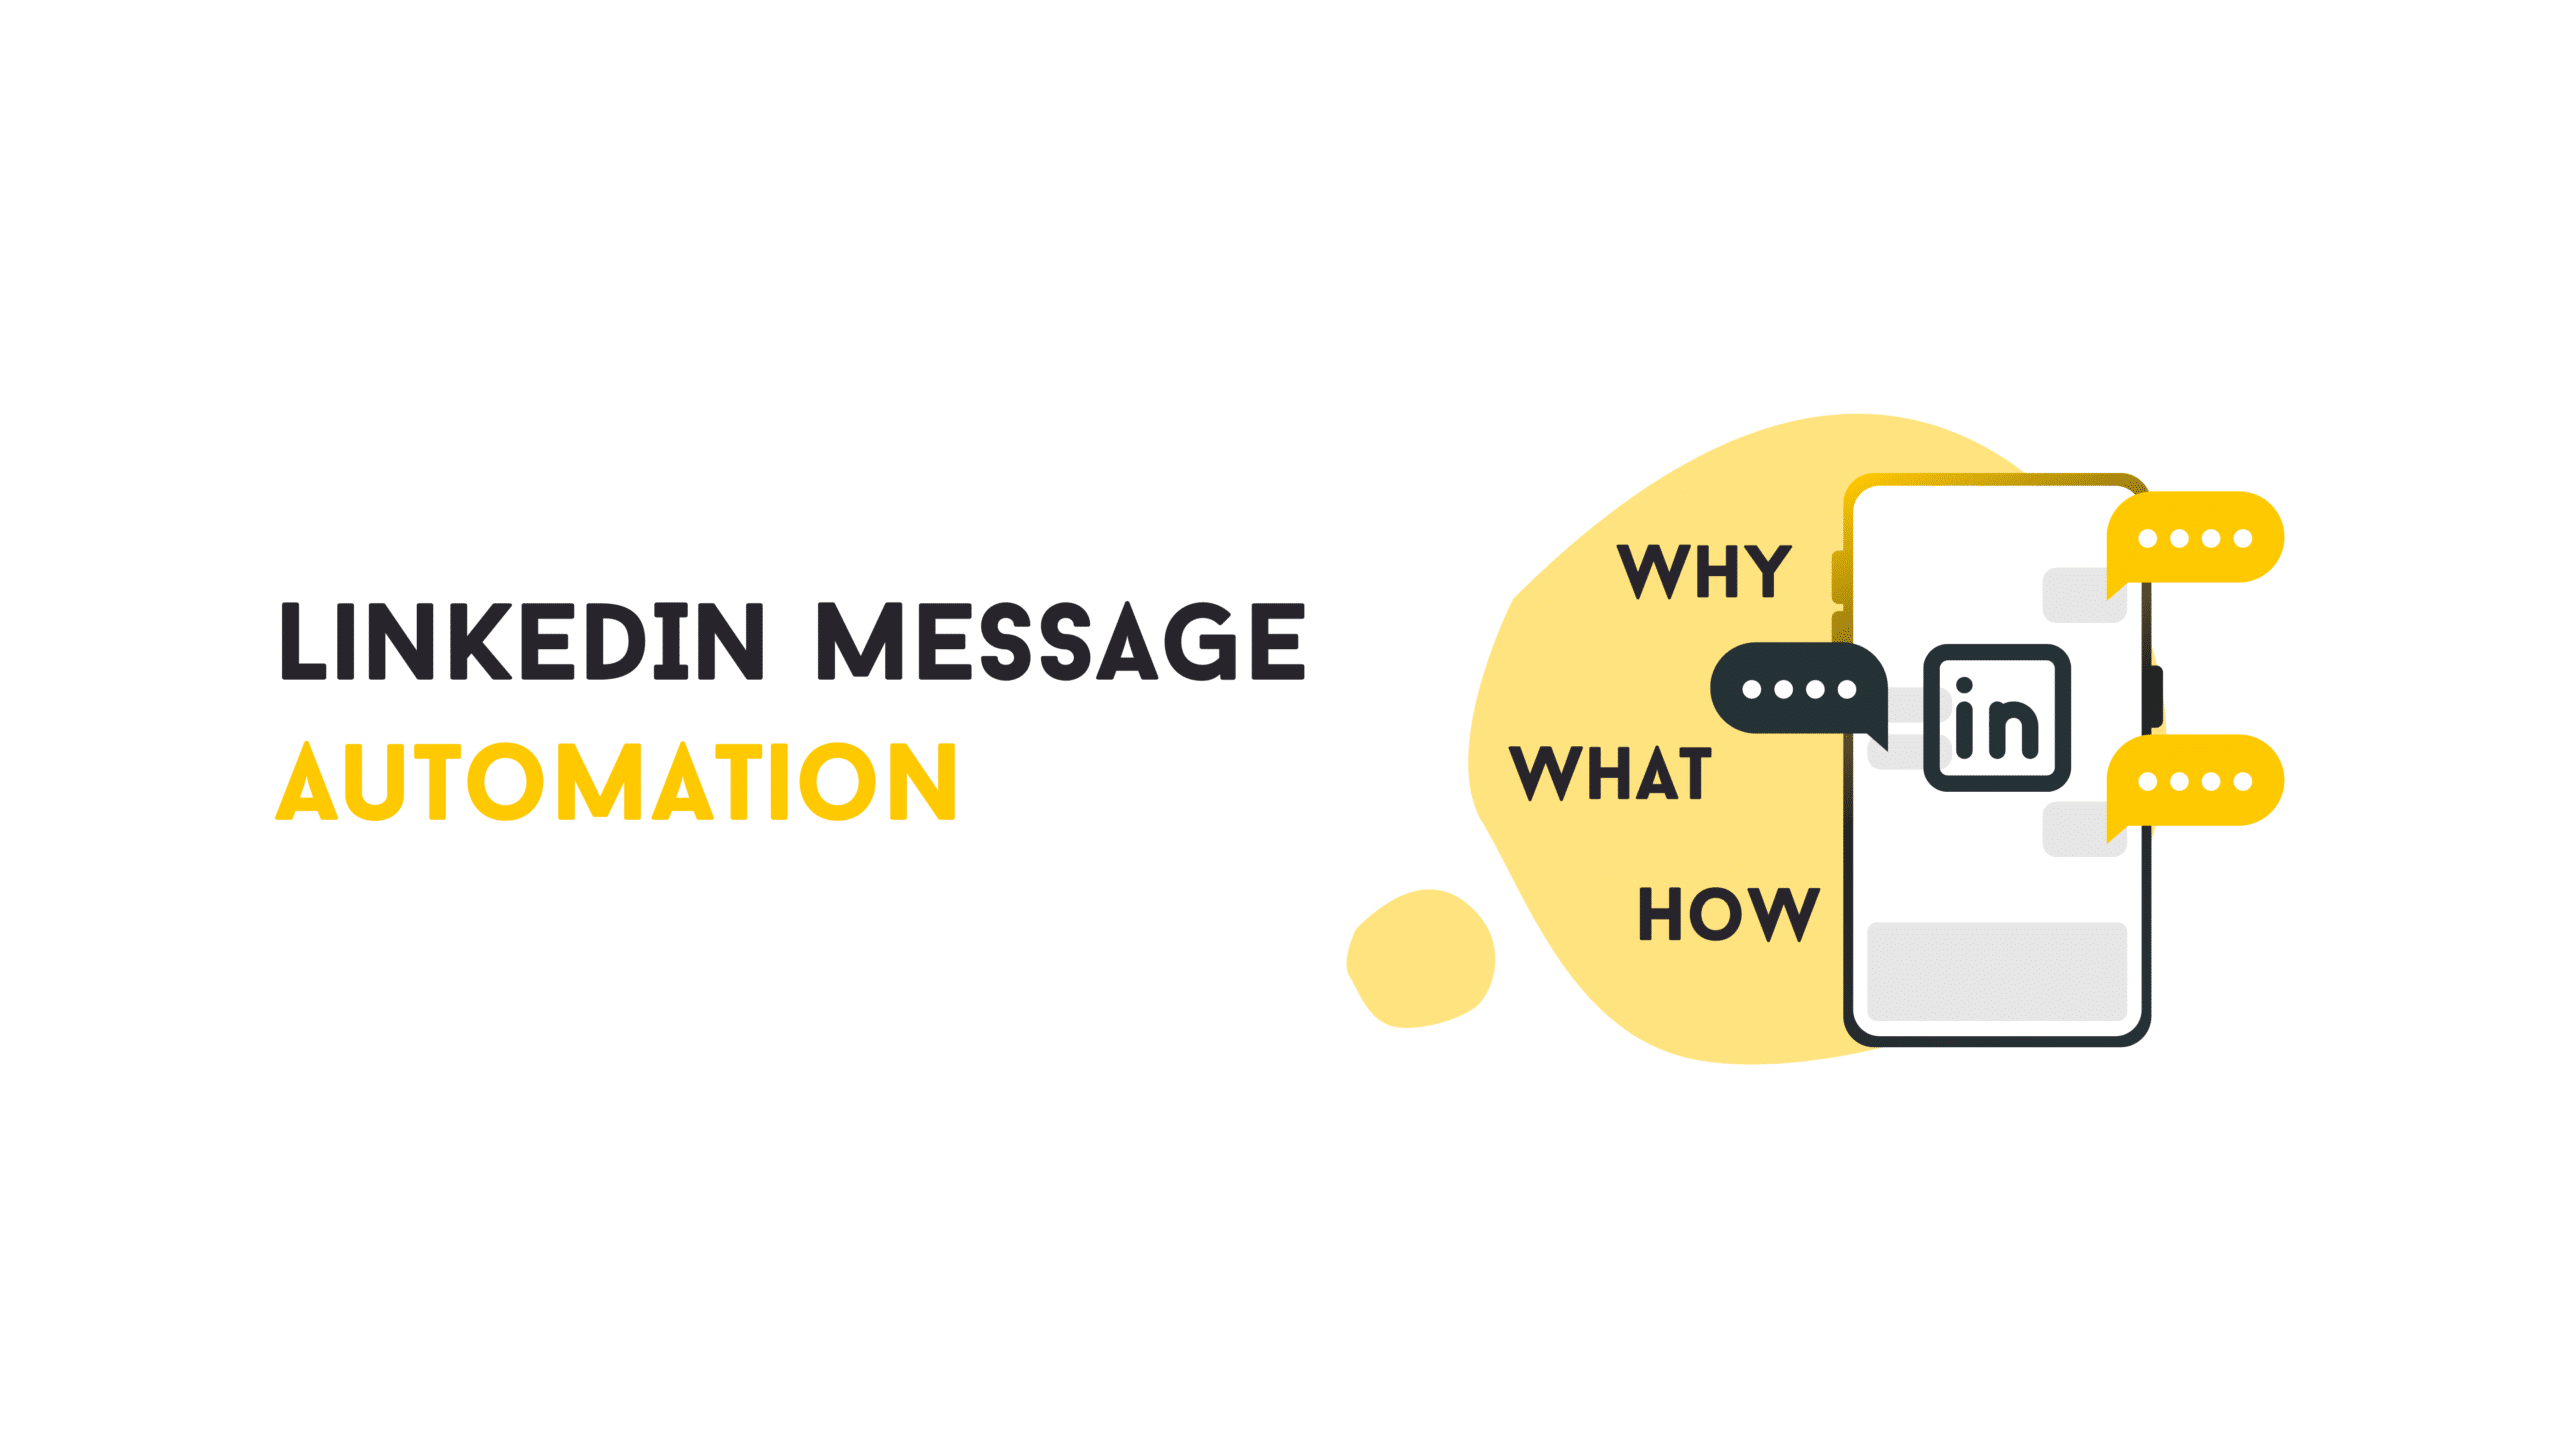 How to Automate LinkedIn Messaging?